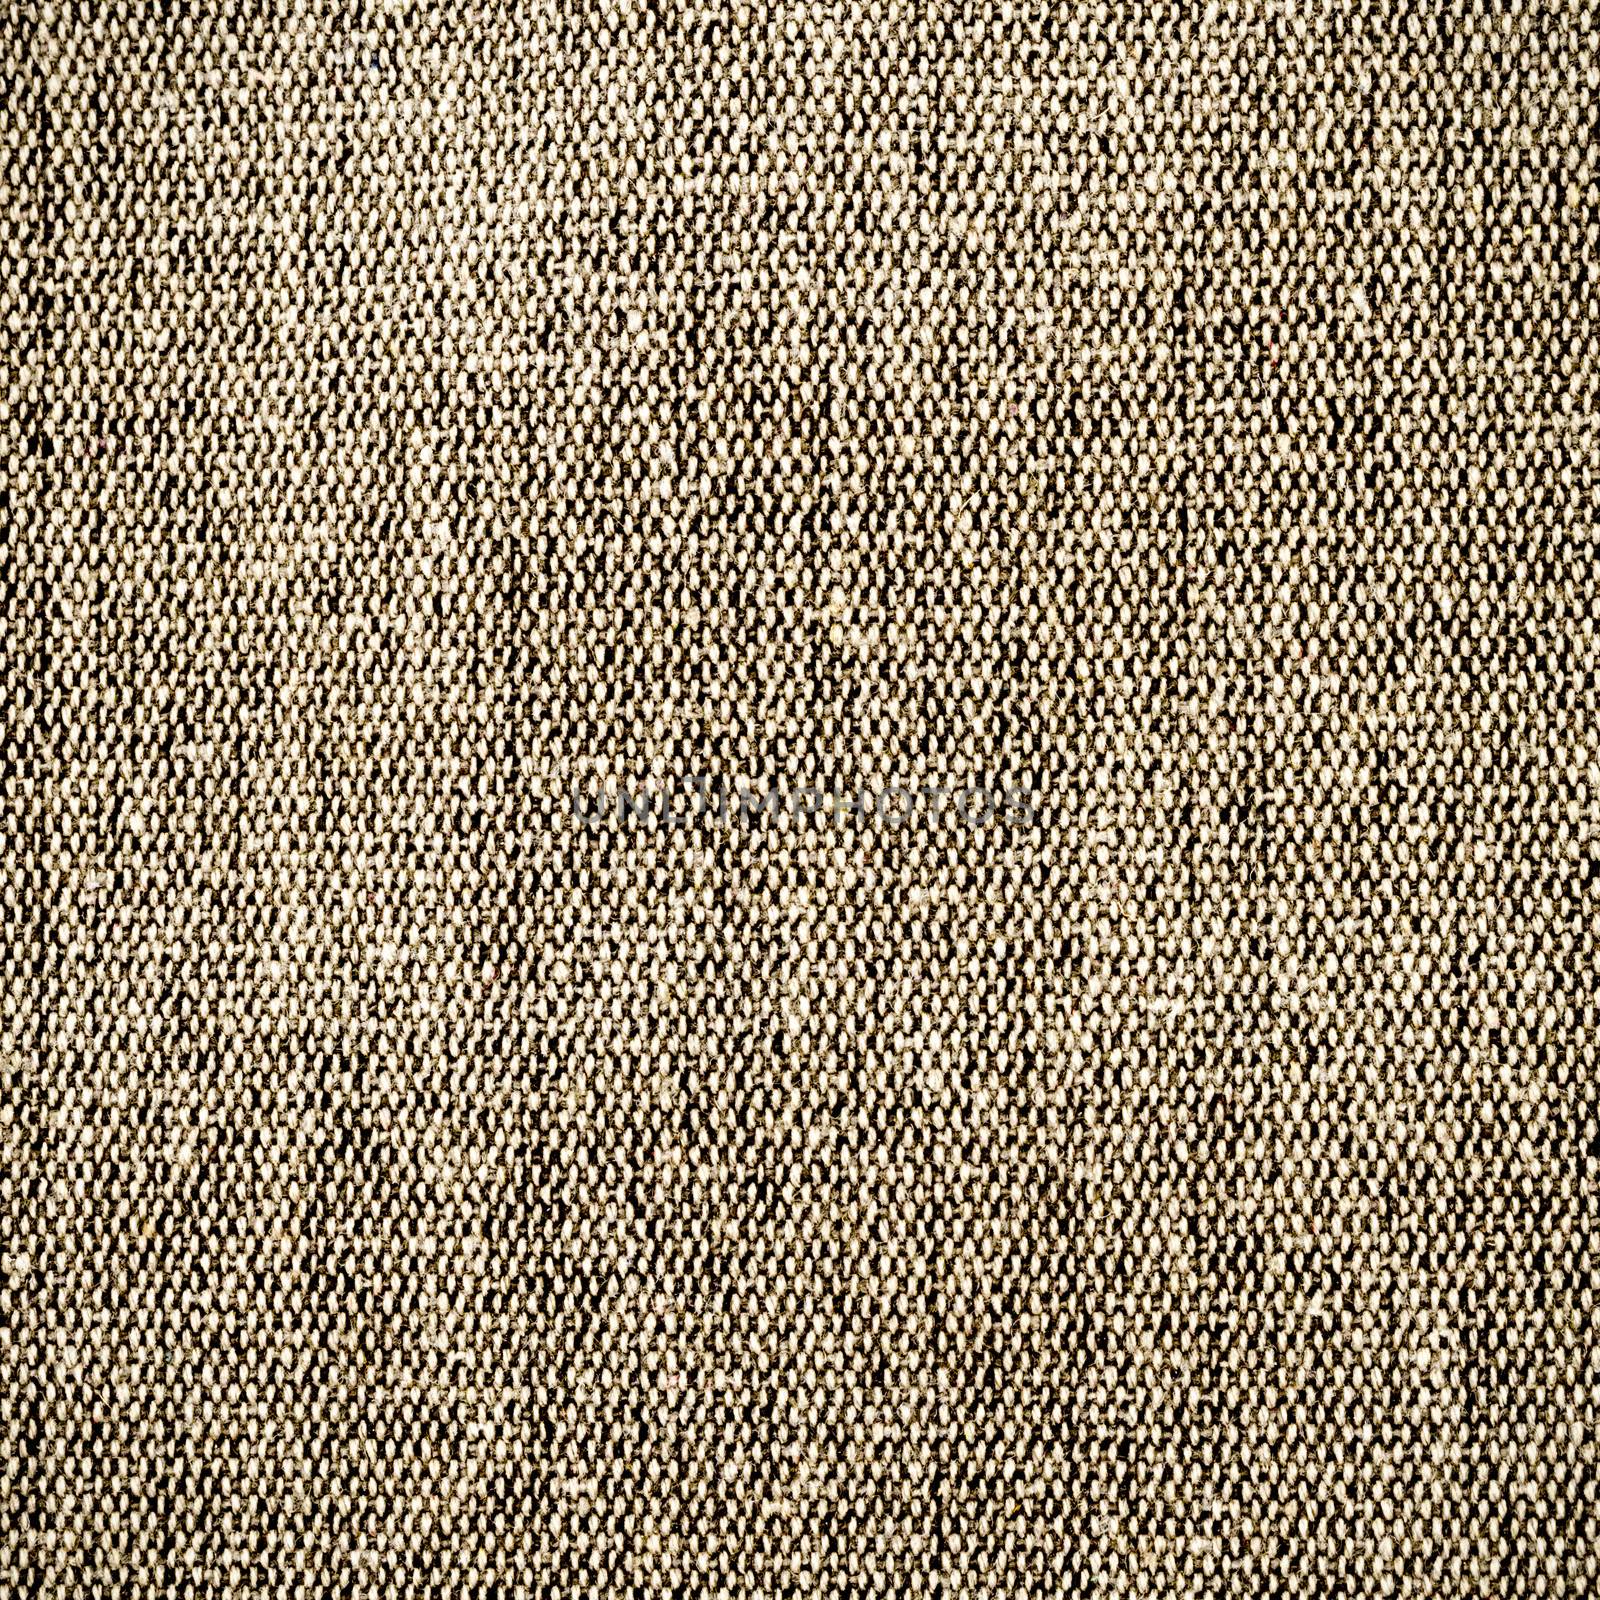 brown bag line background by ammza12